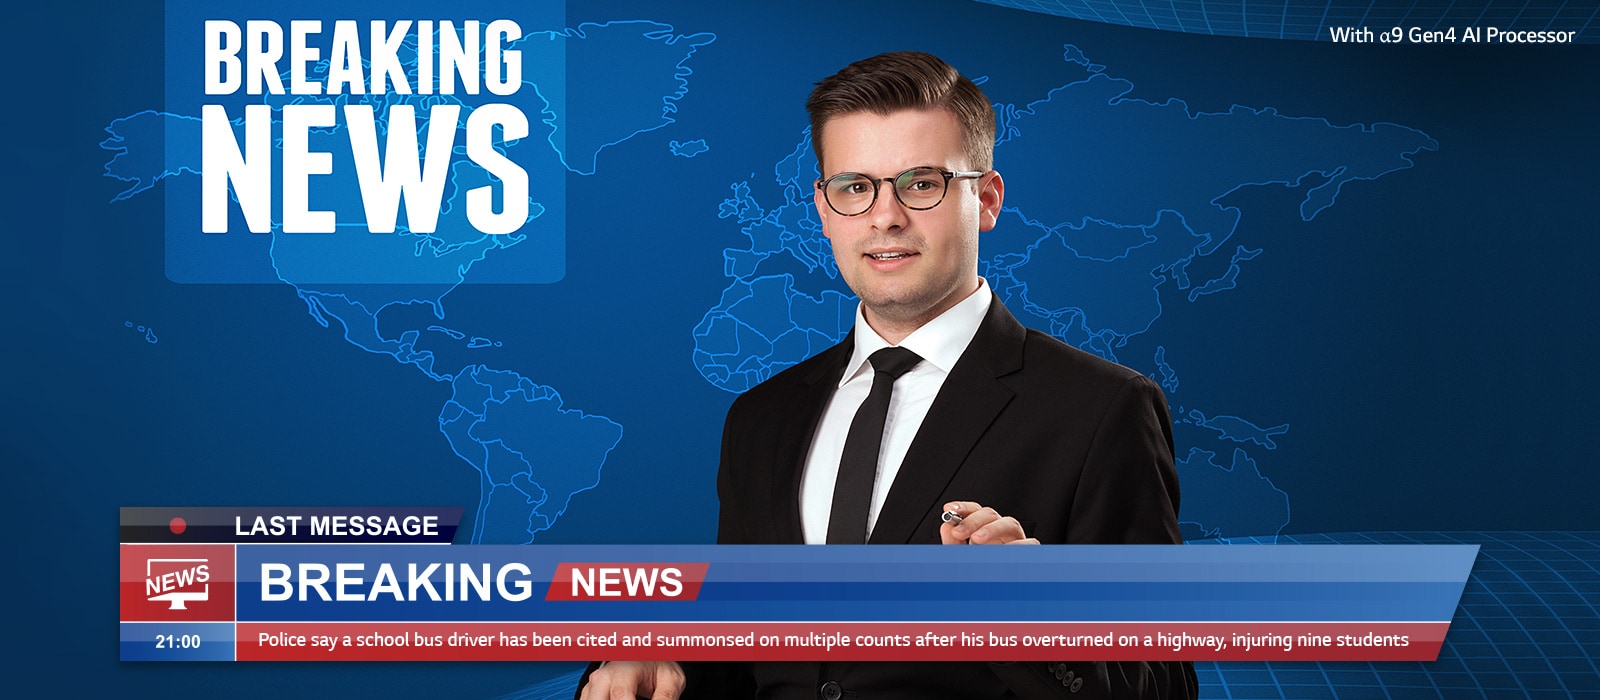 Slider comparison of picture quality of an anchor delivering breaking news with background of world map.